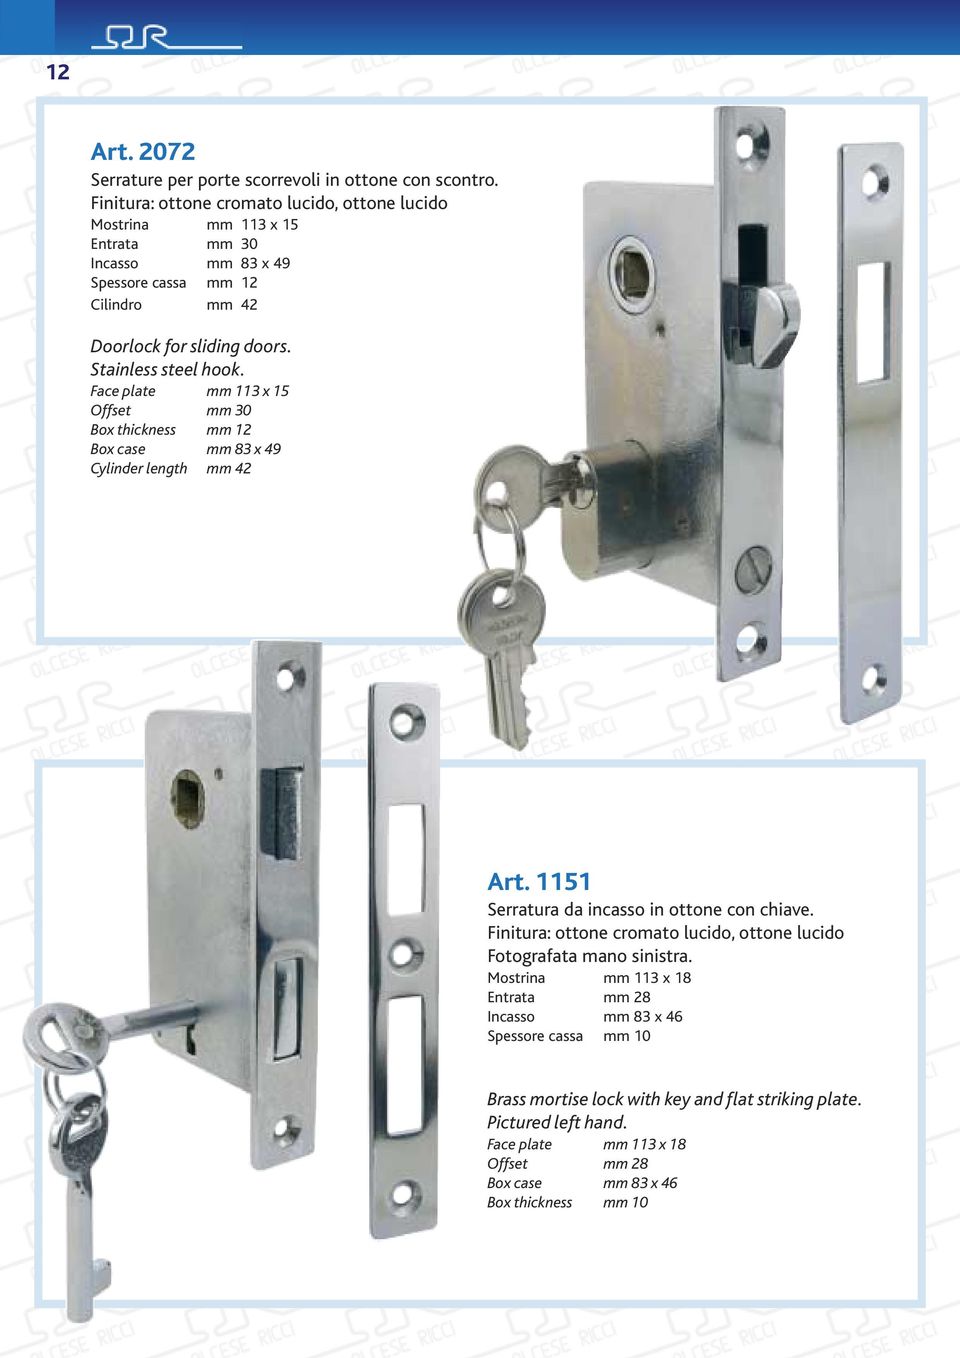 Stainless steel hook. Face plate mm 113 x 15 Offset mm 30 Box thickness mm 12 Box case mm 83 x 49 Cylinder length mm 42 Art. 1151 Serratura da incasso in ottone con chiave.